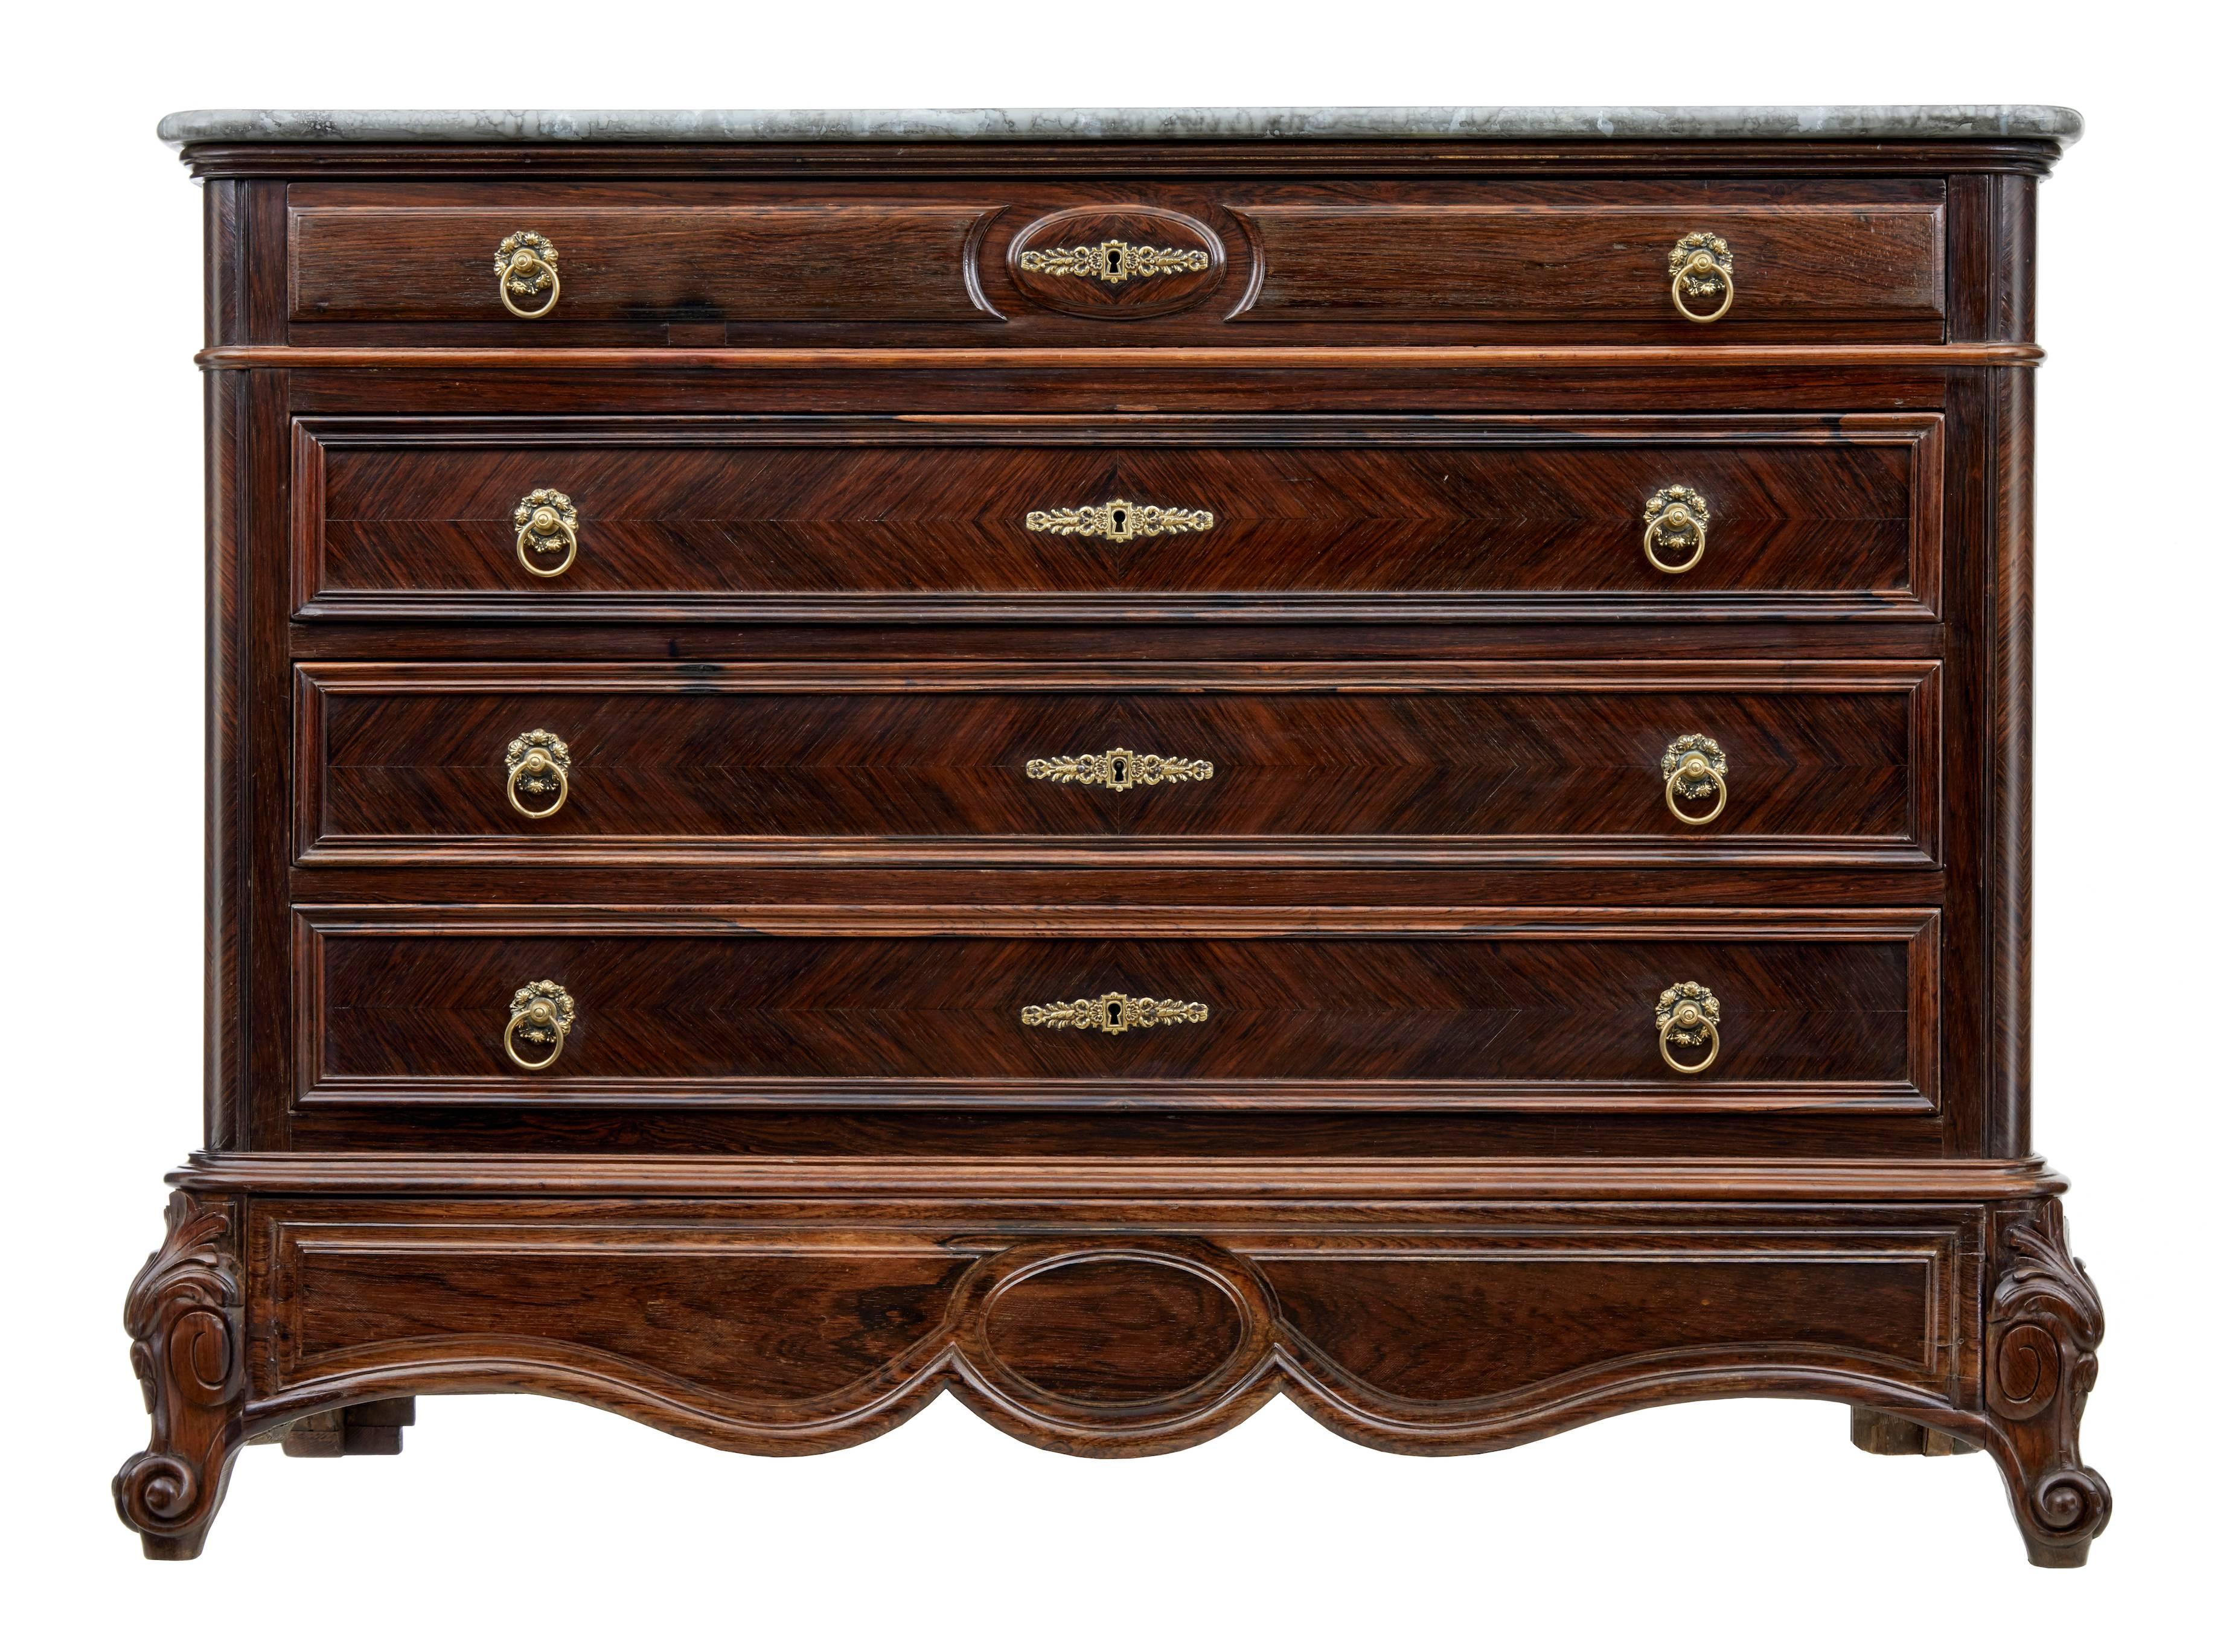 Stunning French commode of grand proportions, circa 1860.
Four-drawer chest with original handles and hardware.
Later simulated marble top.
Striking matched rosewood veneers.
Shaped apron and standing on carved feet.

Measures: Height 38